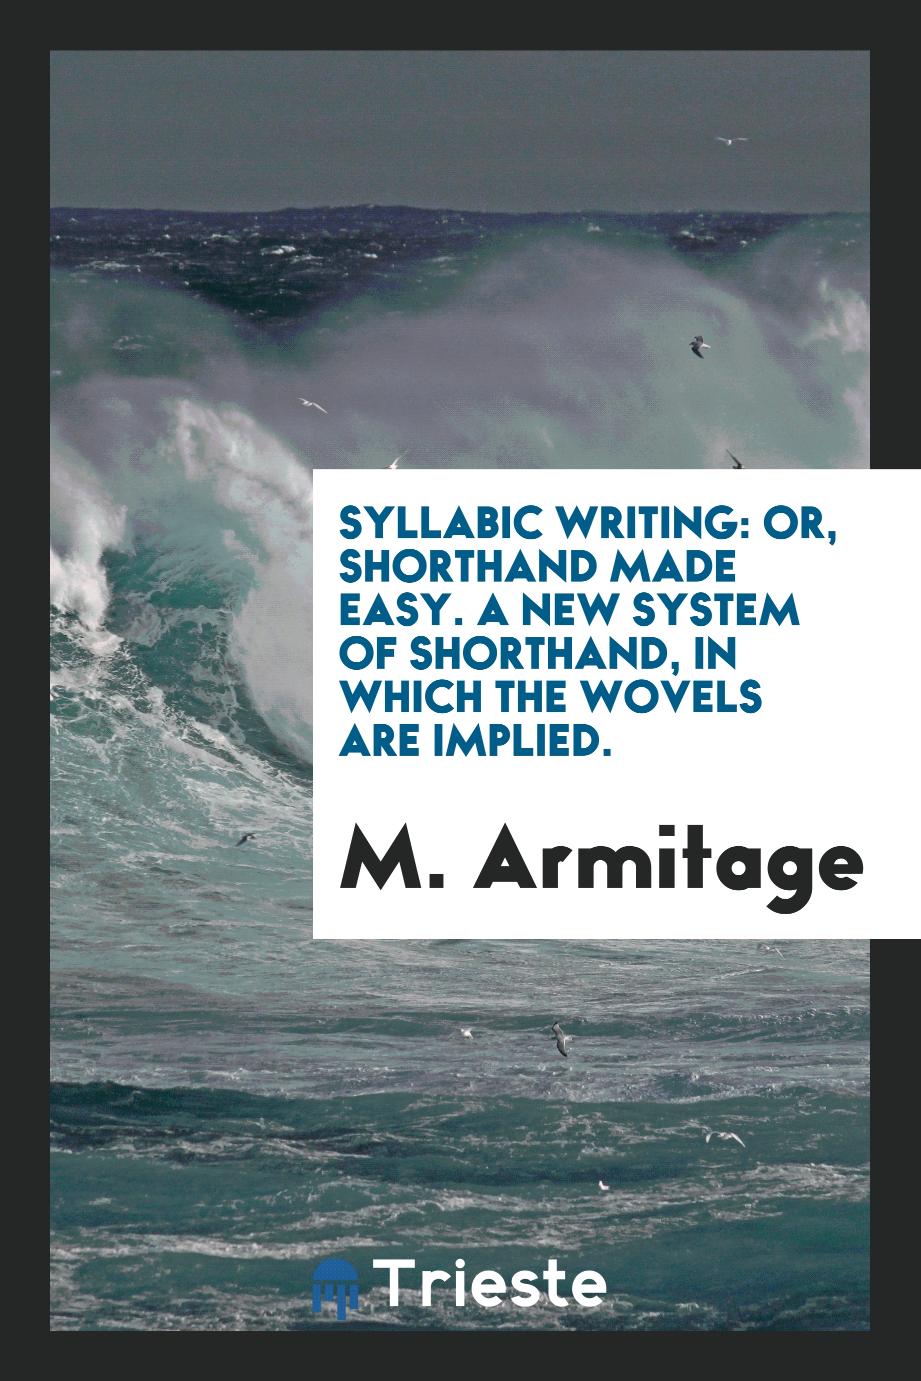 Syllabic writing: or, Shorthand made easy. A new system of shorthand, in which the wovels are implied.